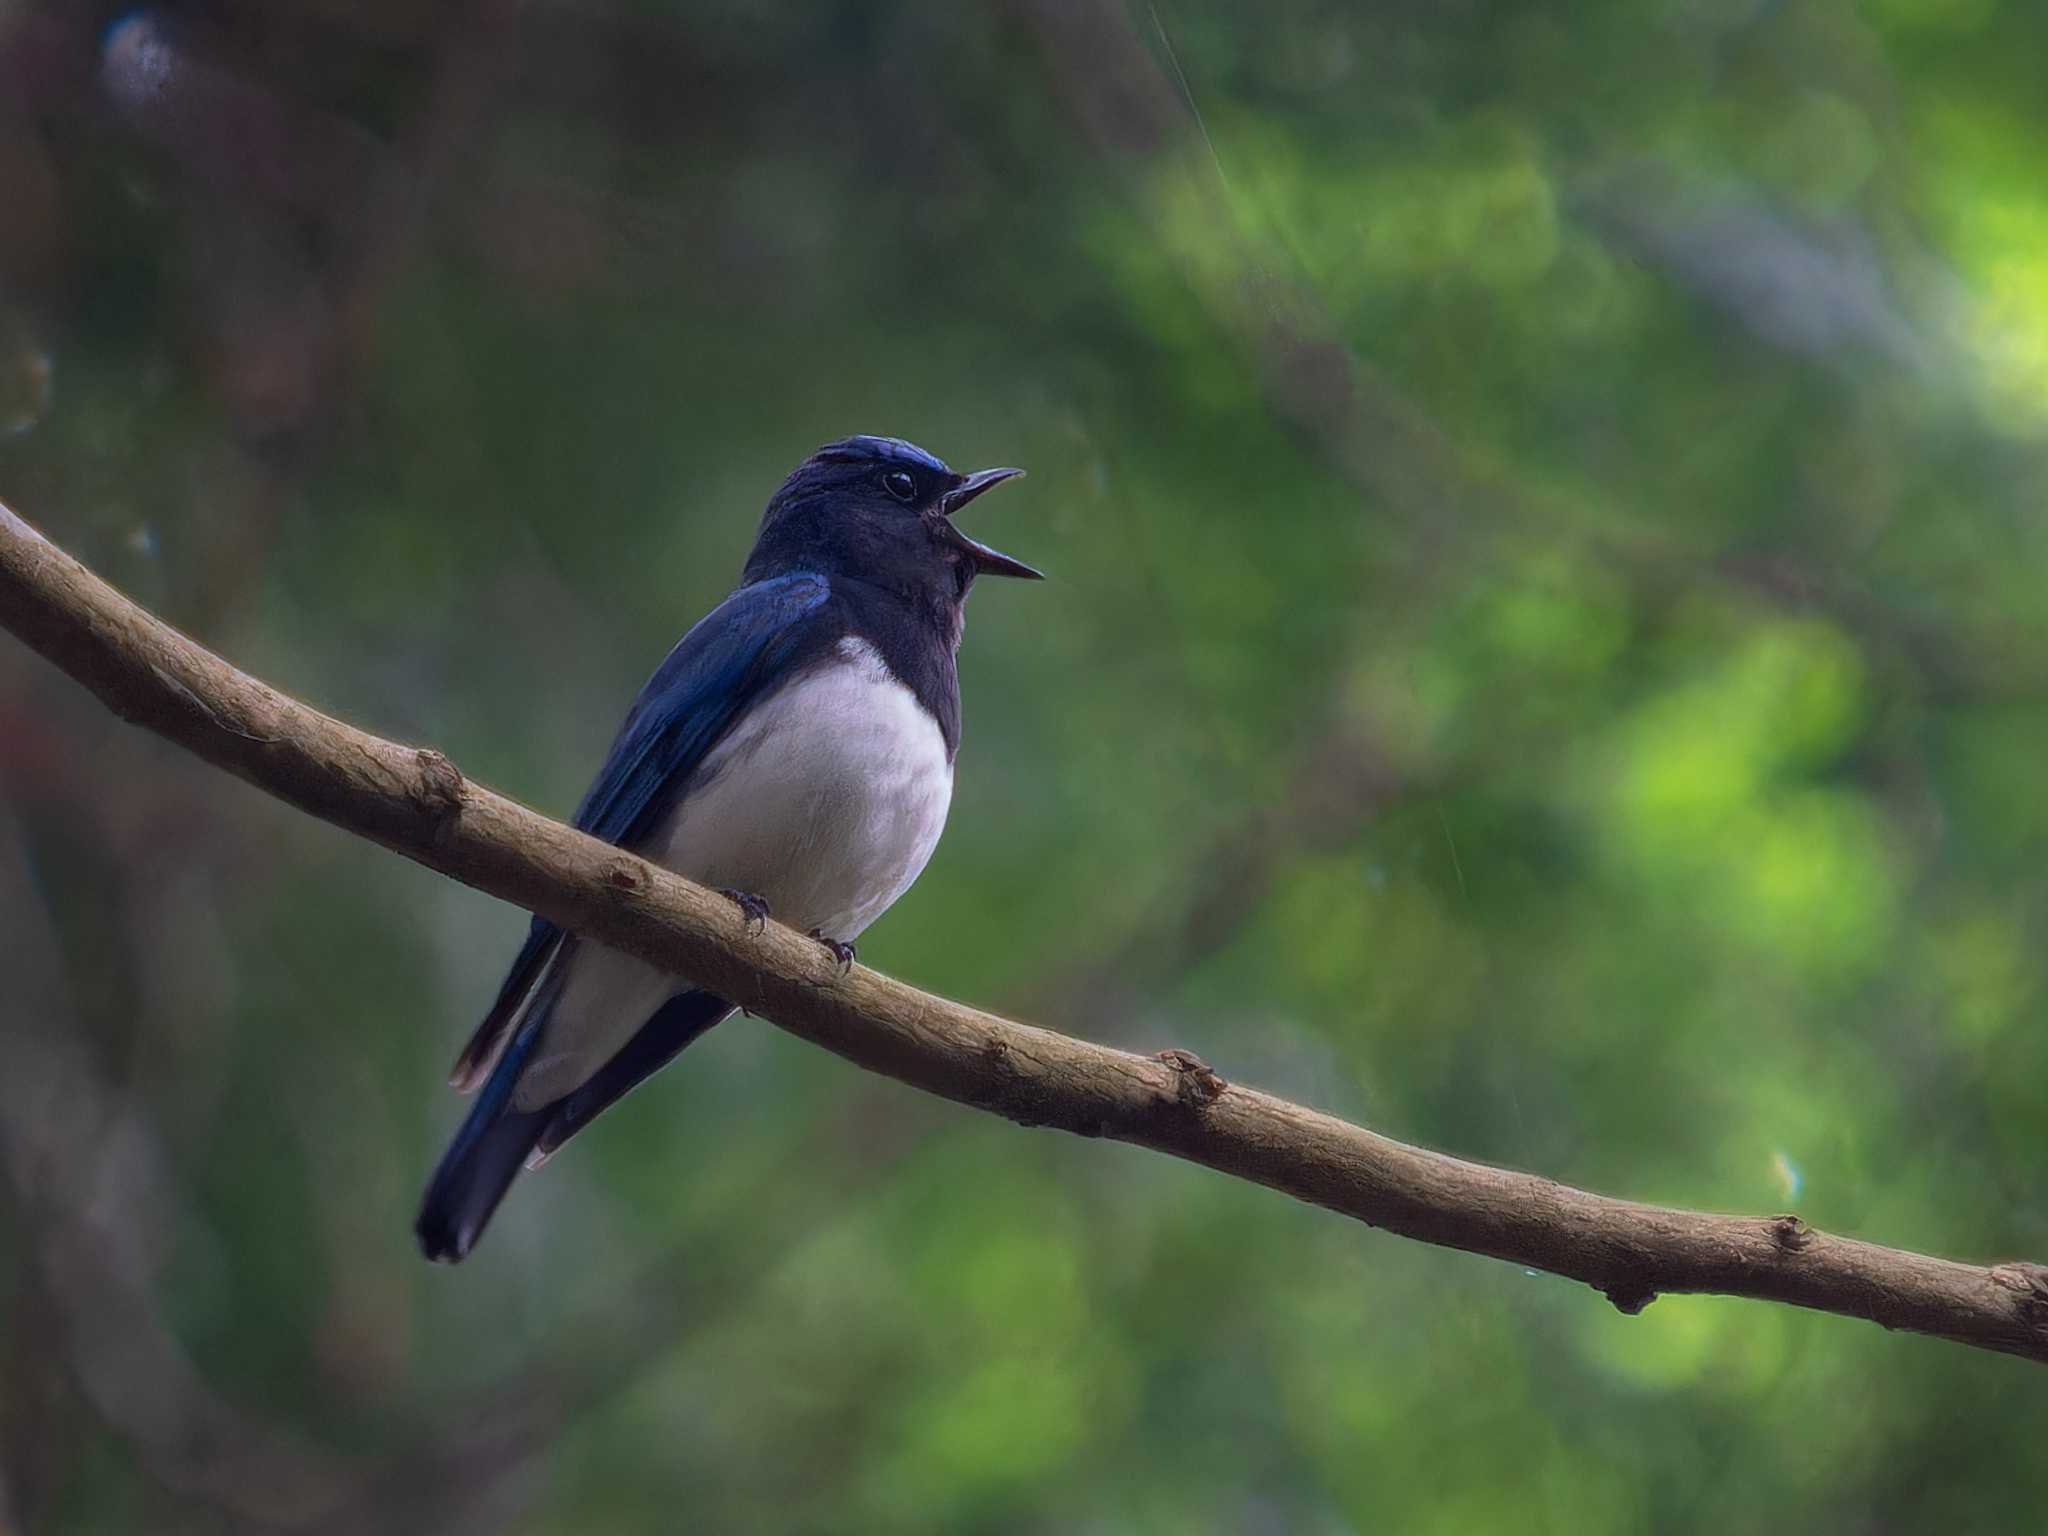 Photo of Blue-and-white Flycatcher at 長崎市民の森 by ここは長崎